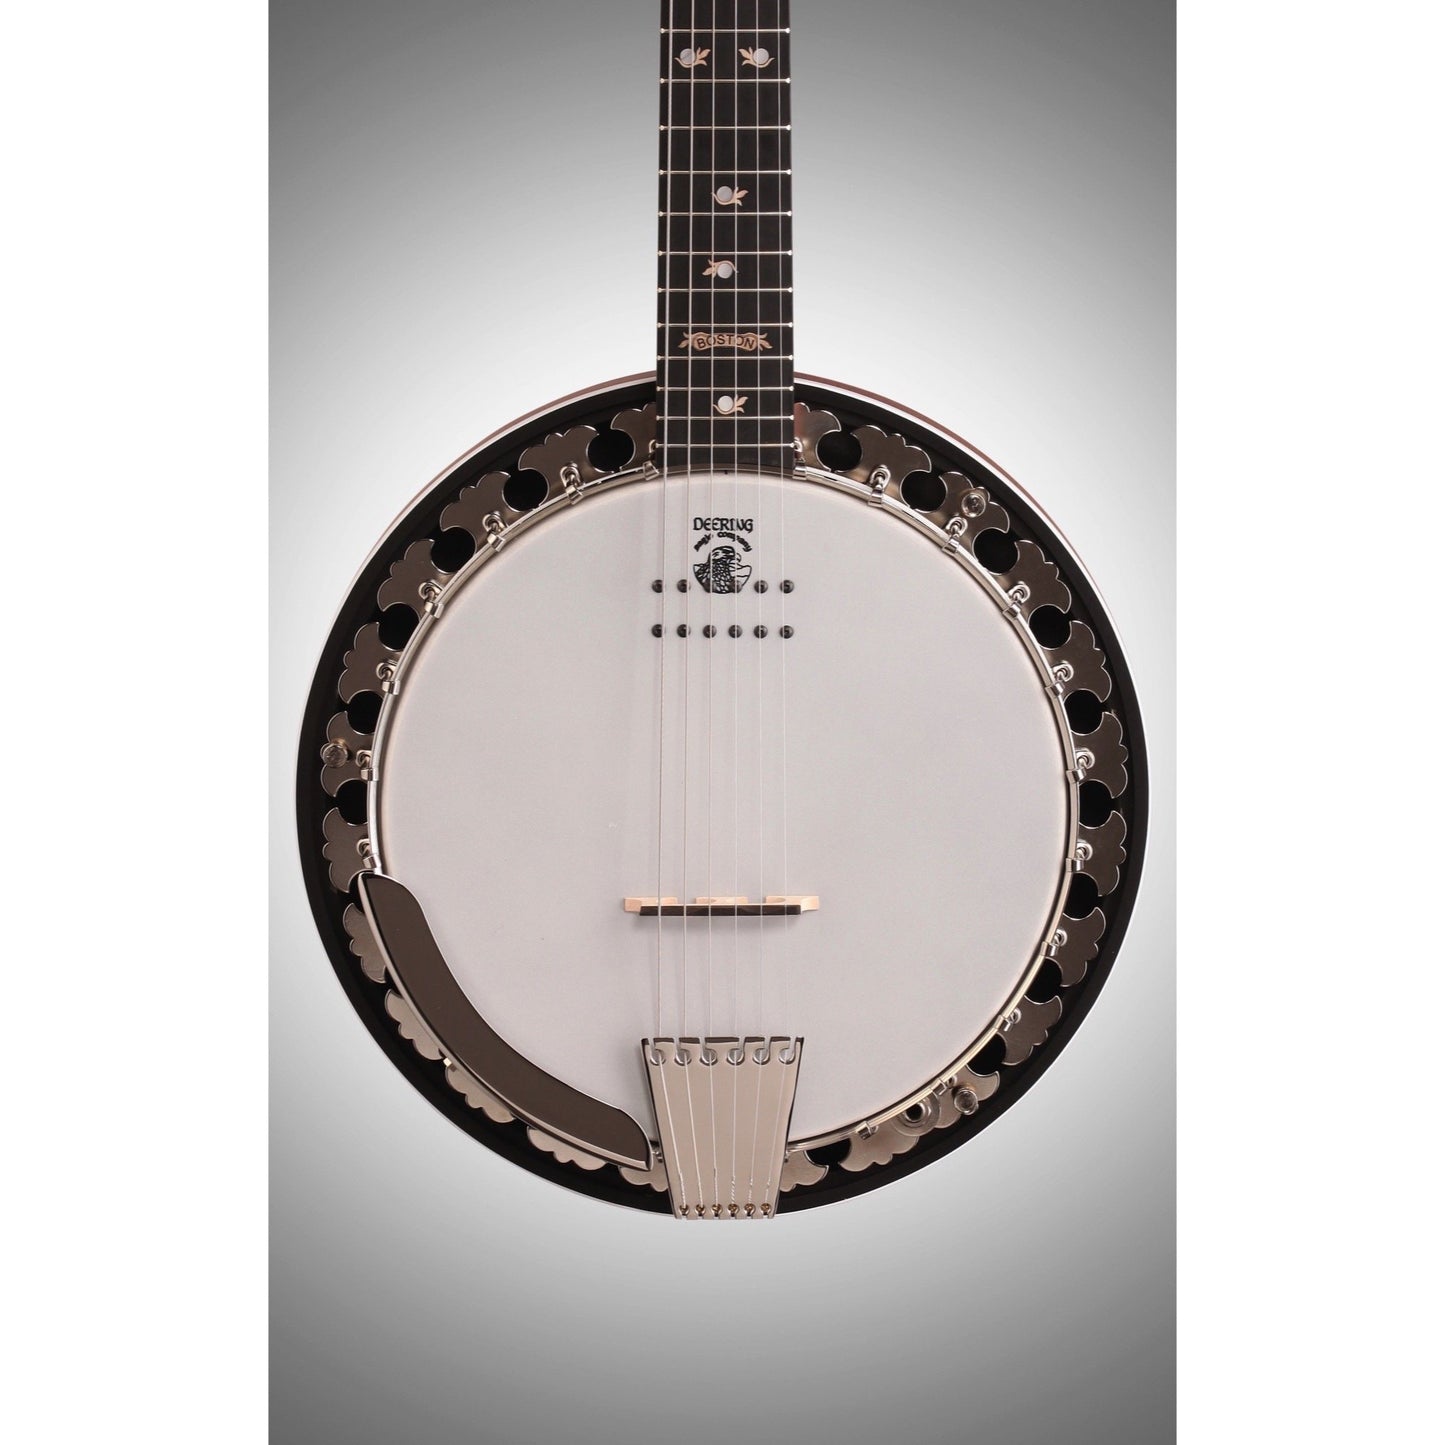 Deering Boston USA Acoustic-Electric Banjo Resonator Guitar, 6-String (with Case)